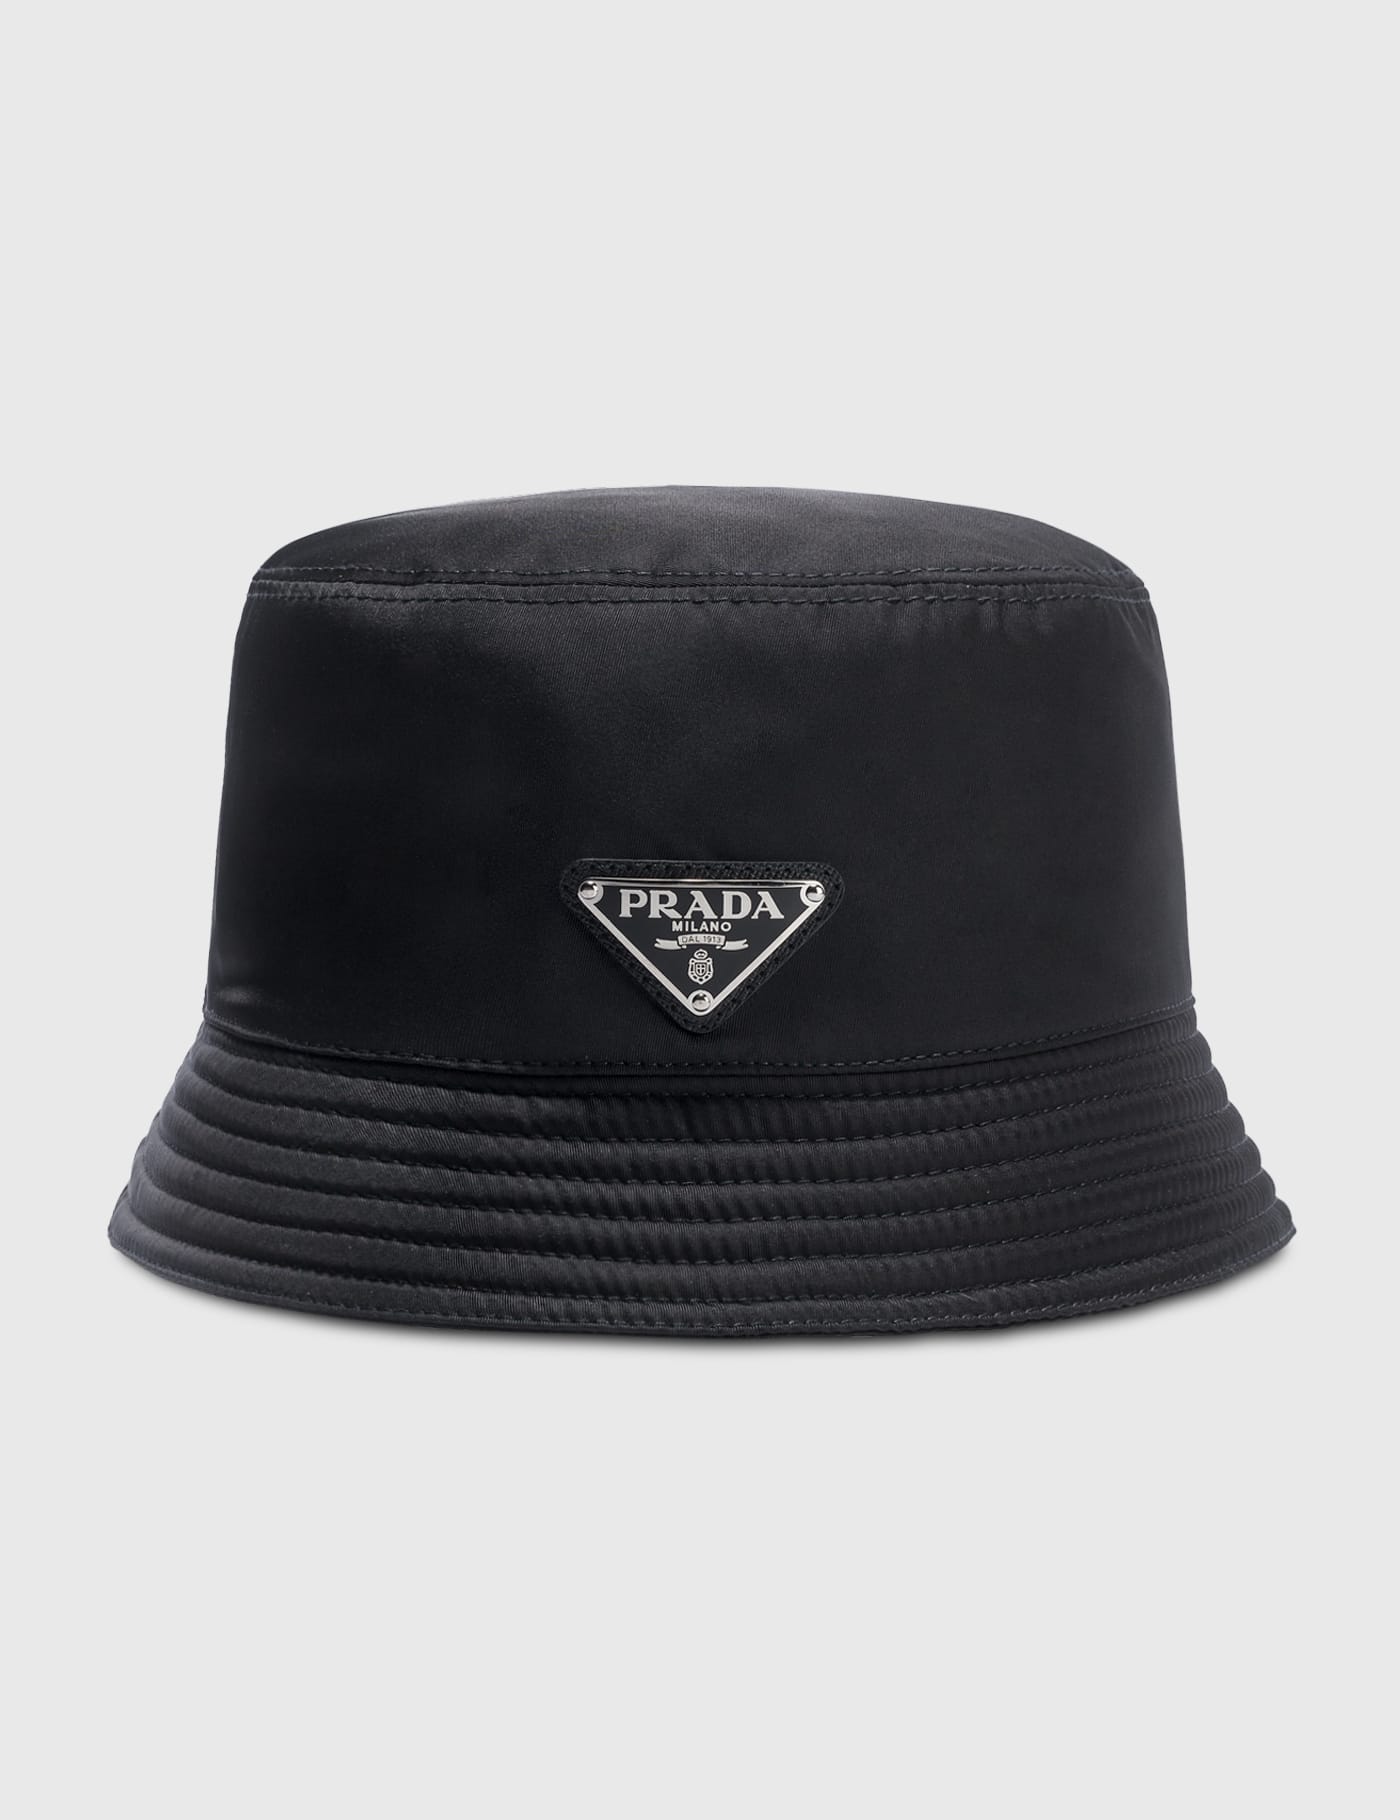 Prada - Re-Nylon Bucket Hat | HBX - Globally Curated Fashion and